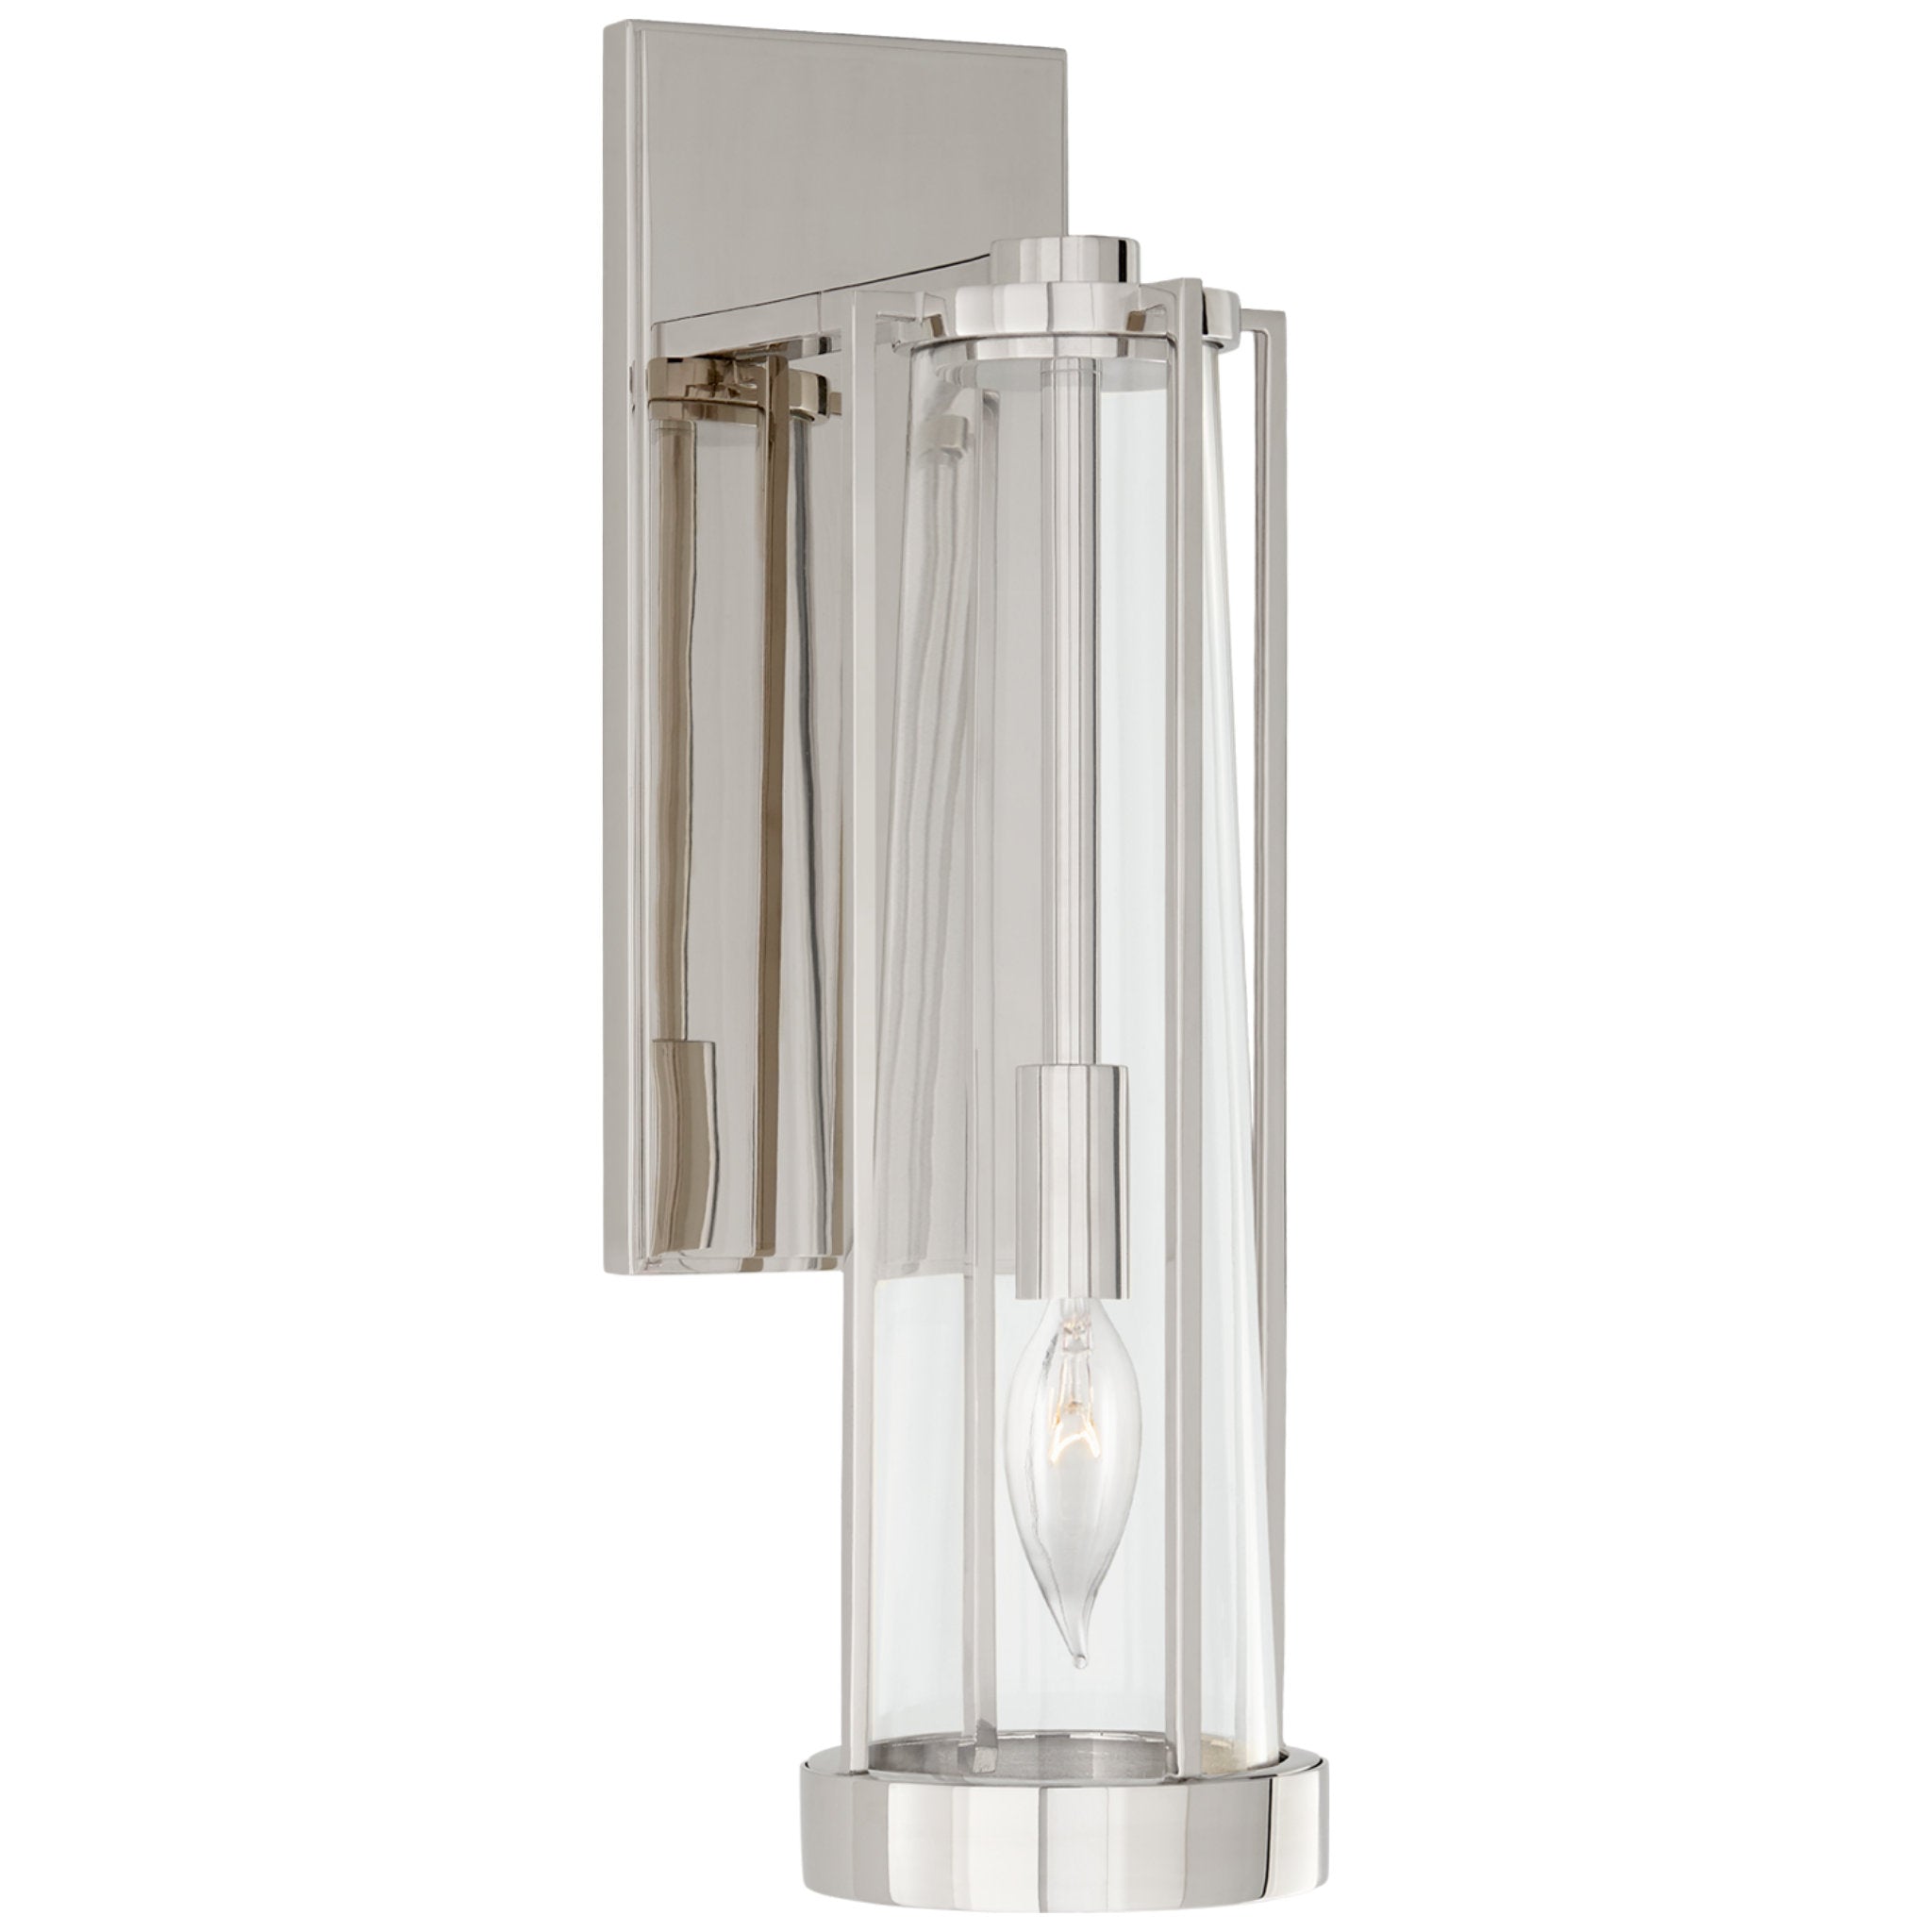 Thomas O'Brien Calix Bracketed Sconce in Polished Nickel with Clear Glass